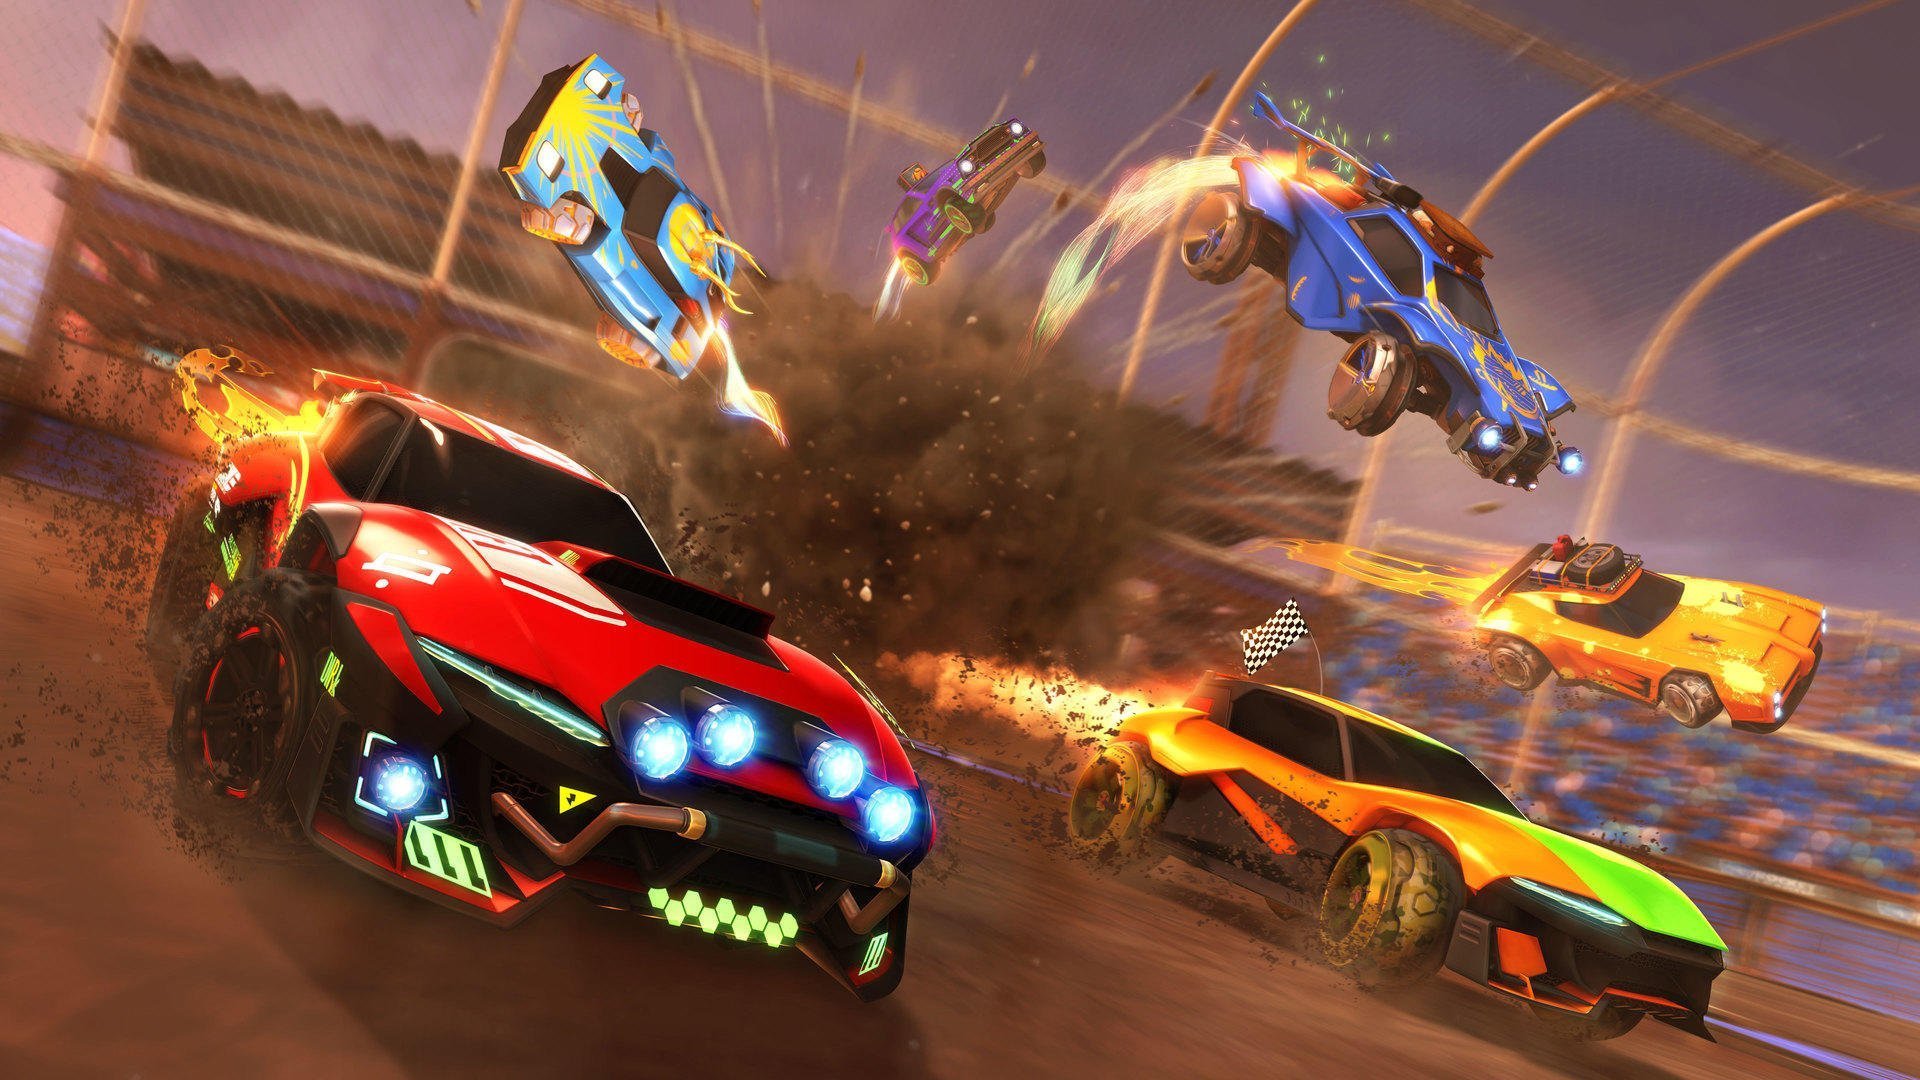 Rocket League Rocket Pass 4 Will Include New Car and Updates